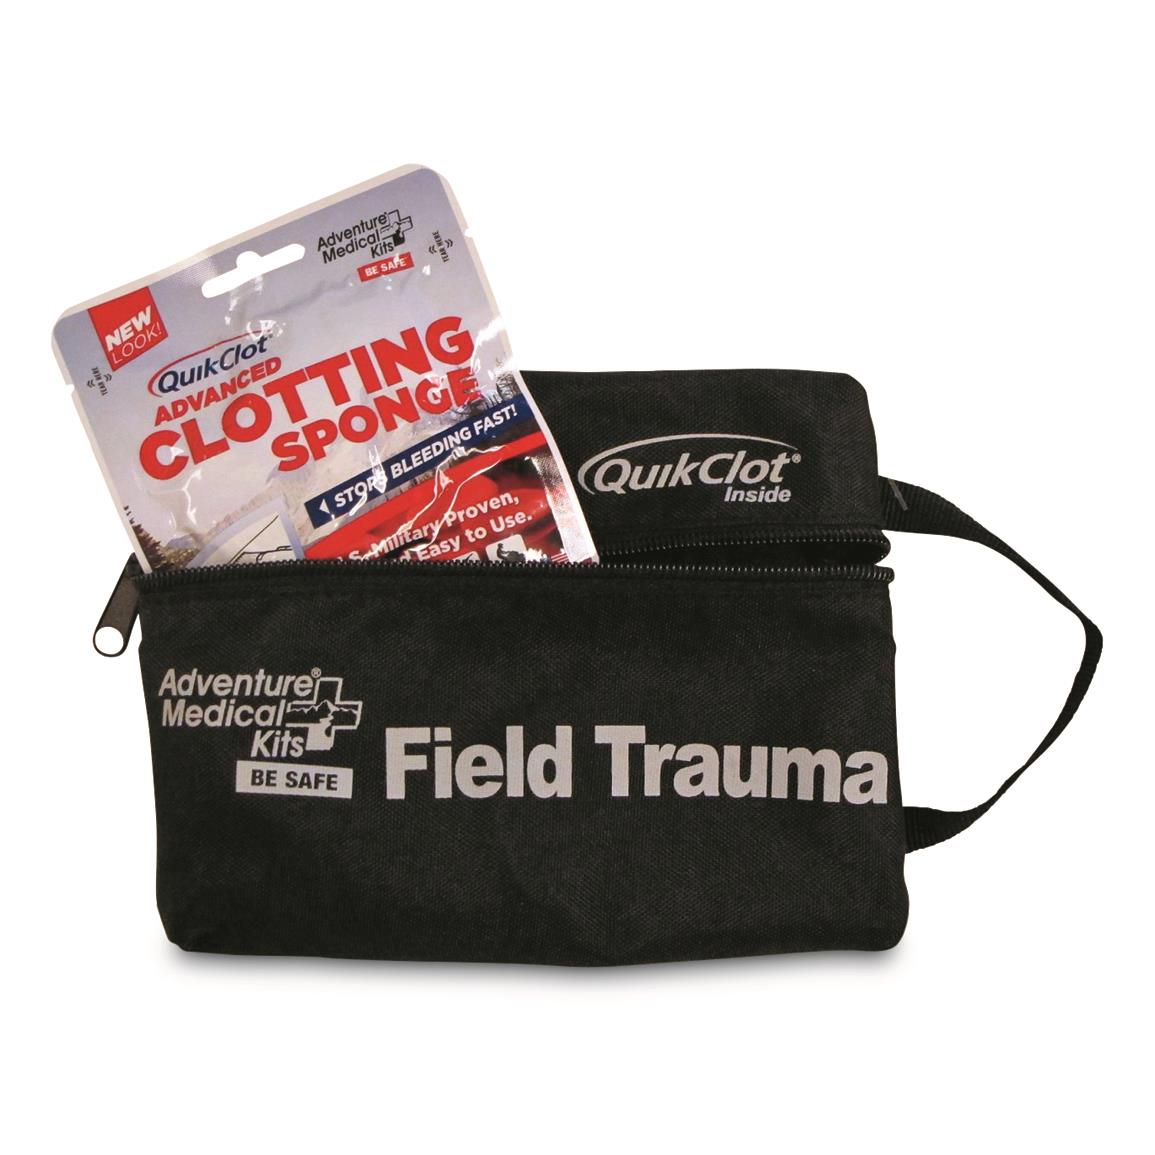 Adventure Medical Kits Tactical Field Trauma First Aid Kit with QuikClot